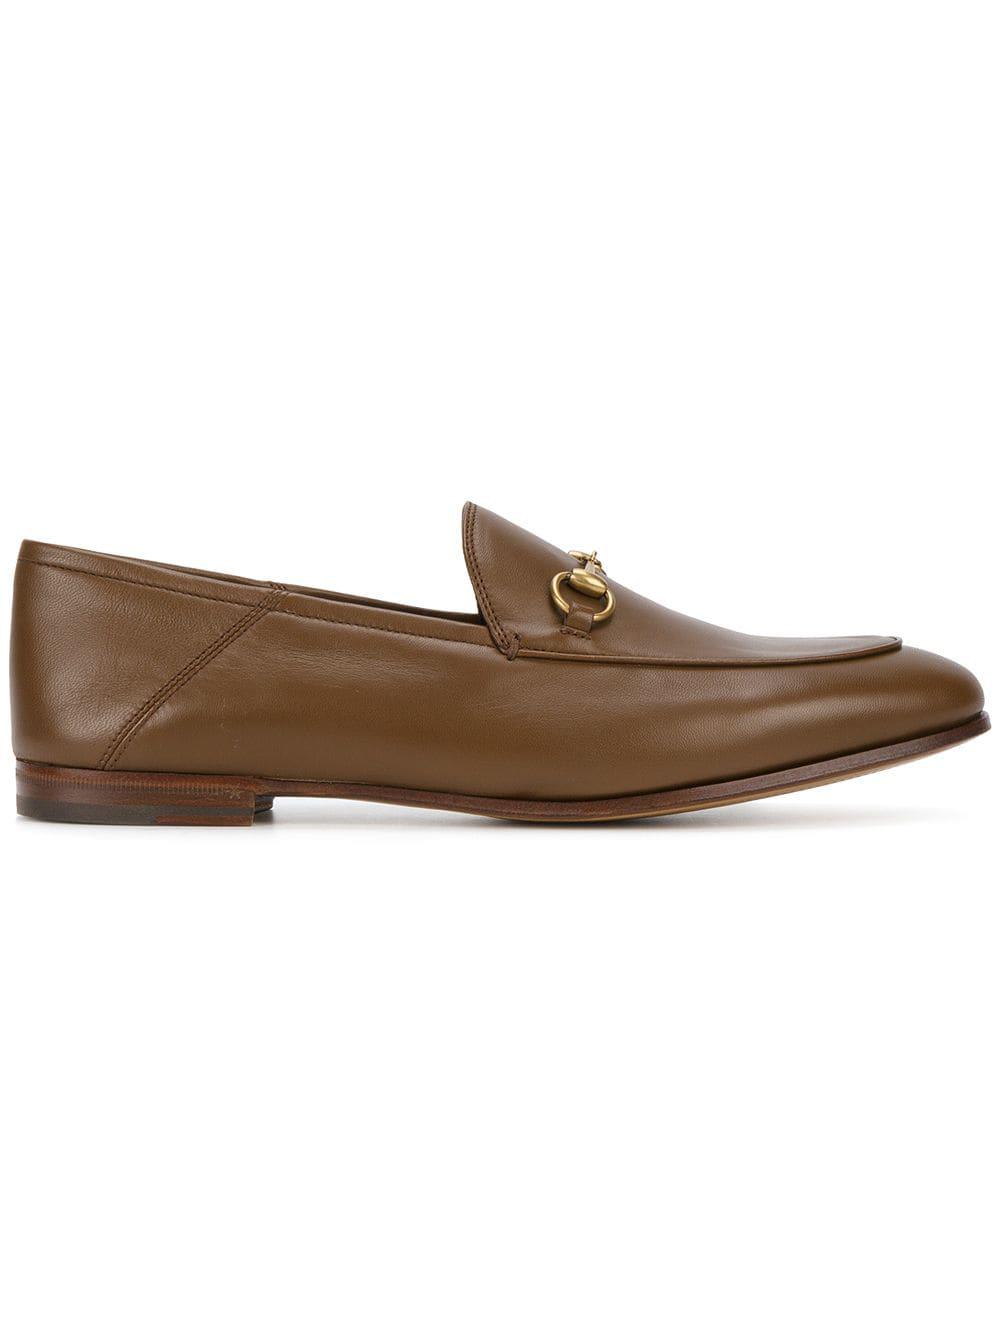 gucci brixton loafers sale